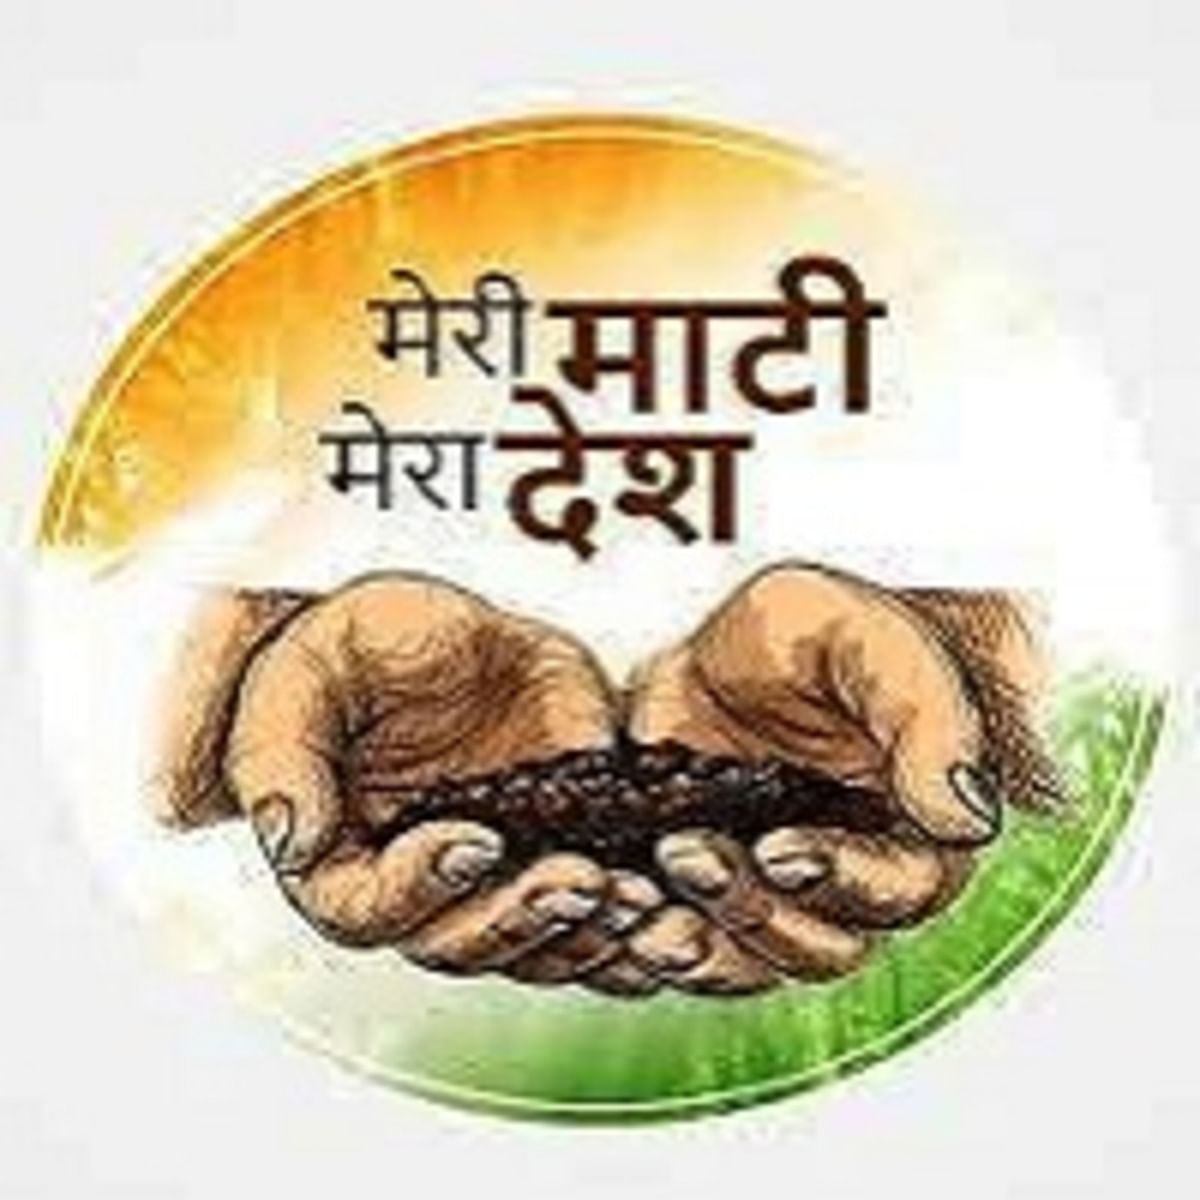 UP News: Yogi government will celebrate 'Meri Mati-Mera Desh' campaign in a grand manner, these events will be held from August 9 to 15